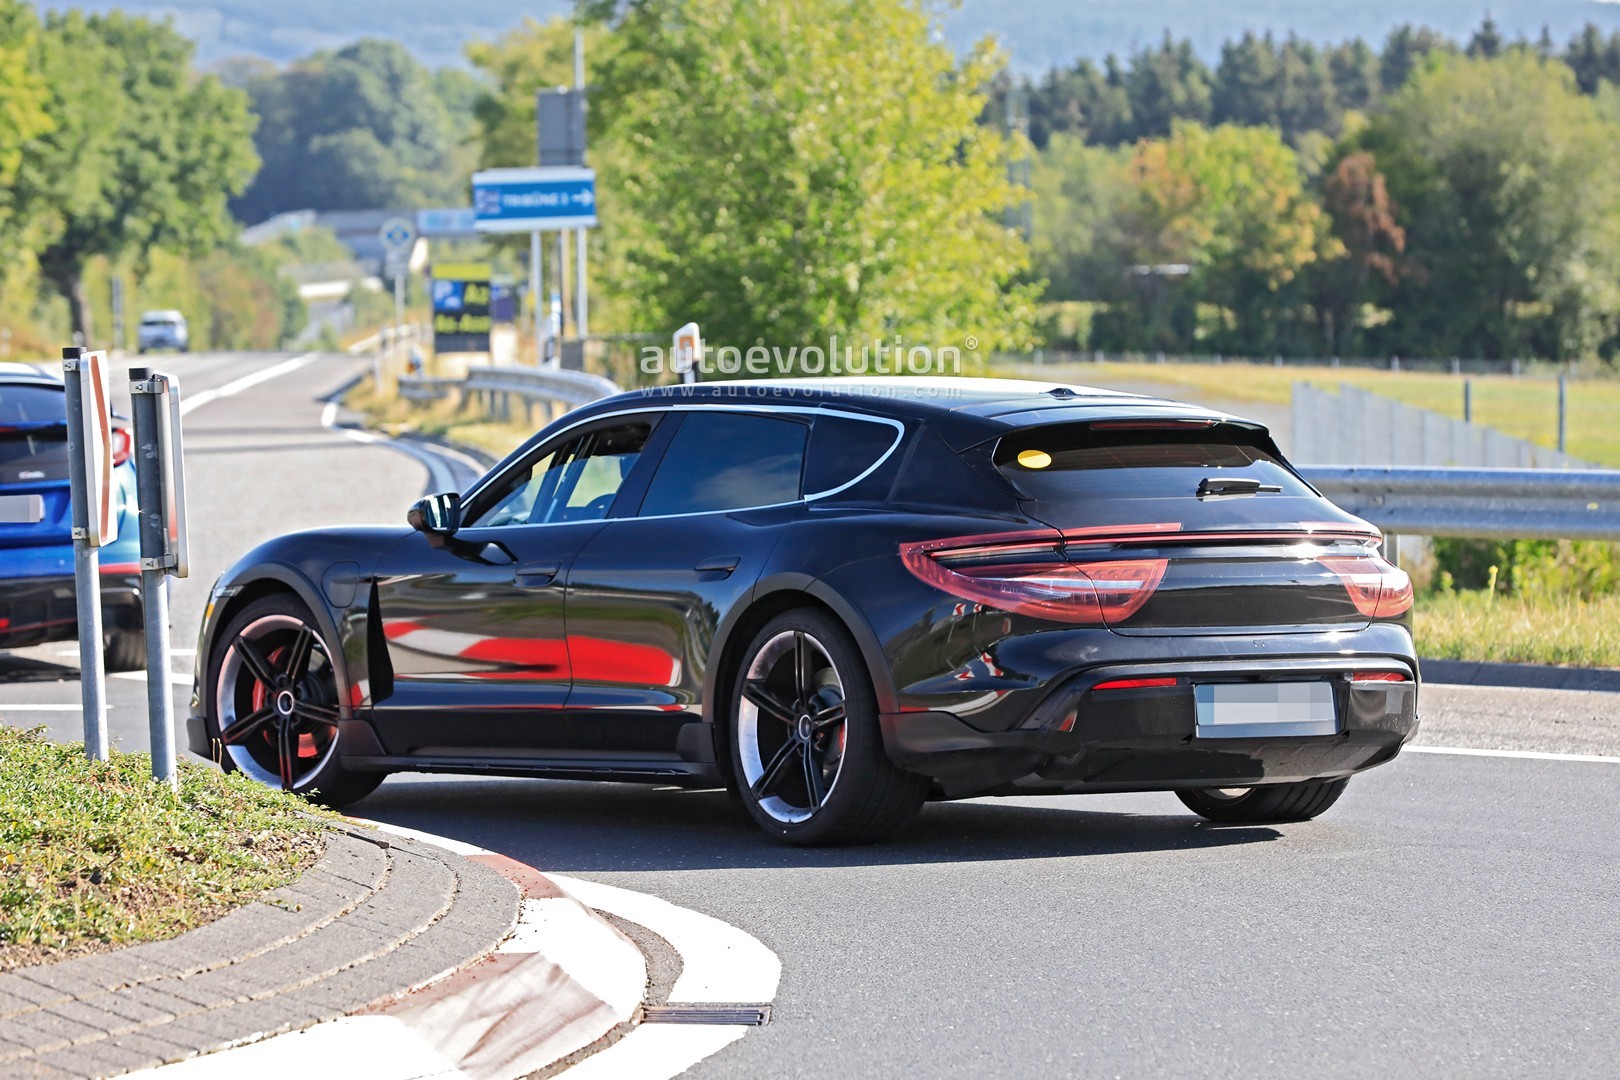 2020 - [Porsche] Taycan Sport Turismo - Page 2 Porsche-taycan-cross-turismo-spied-testing-hard-at-the-nurburgring_13